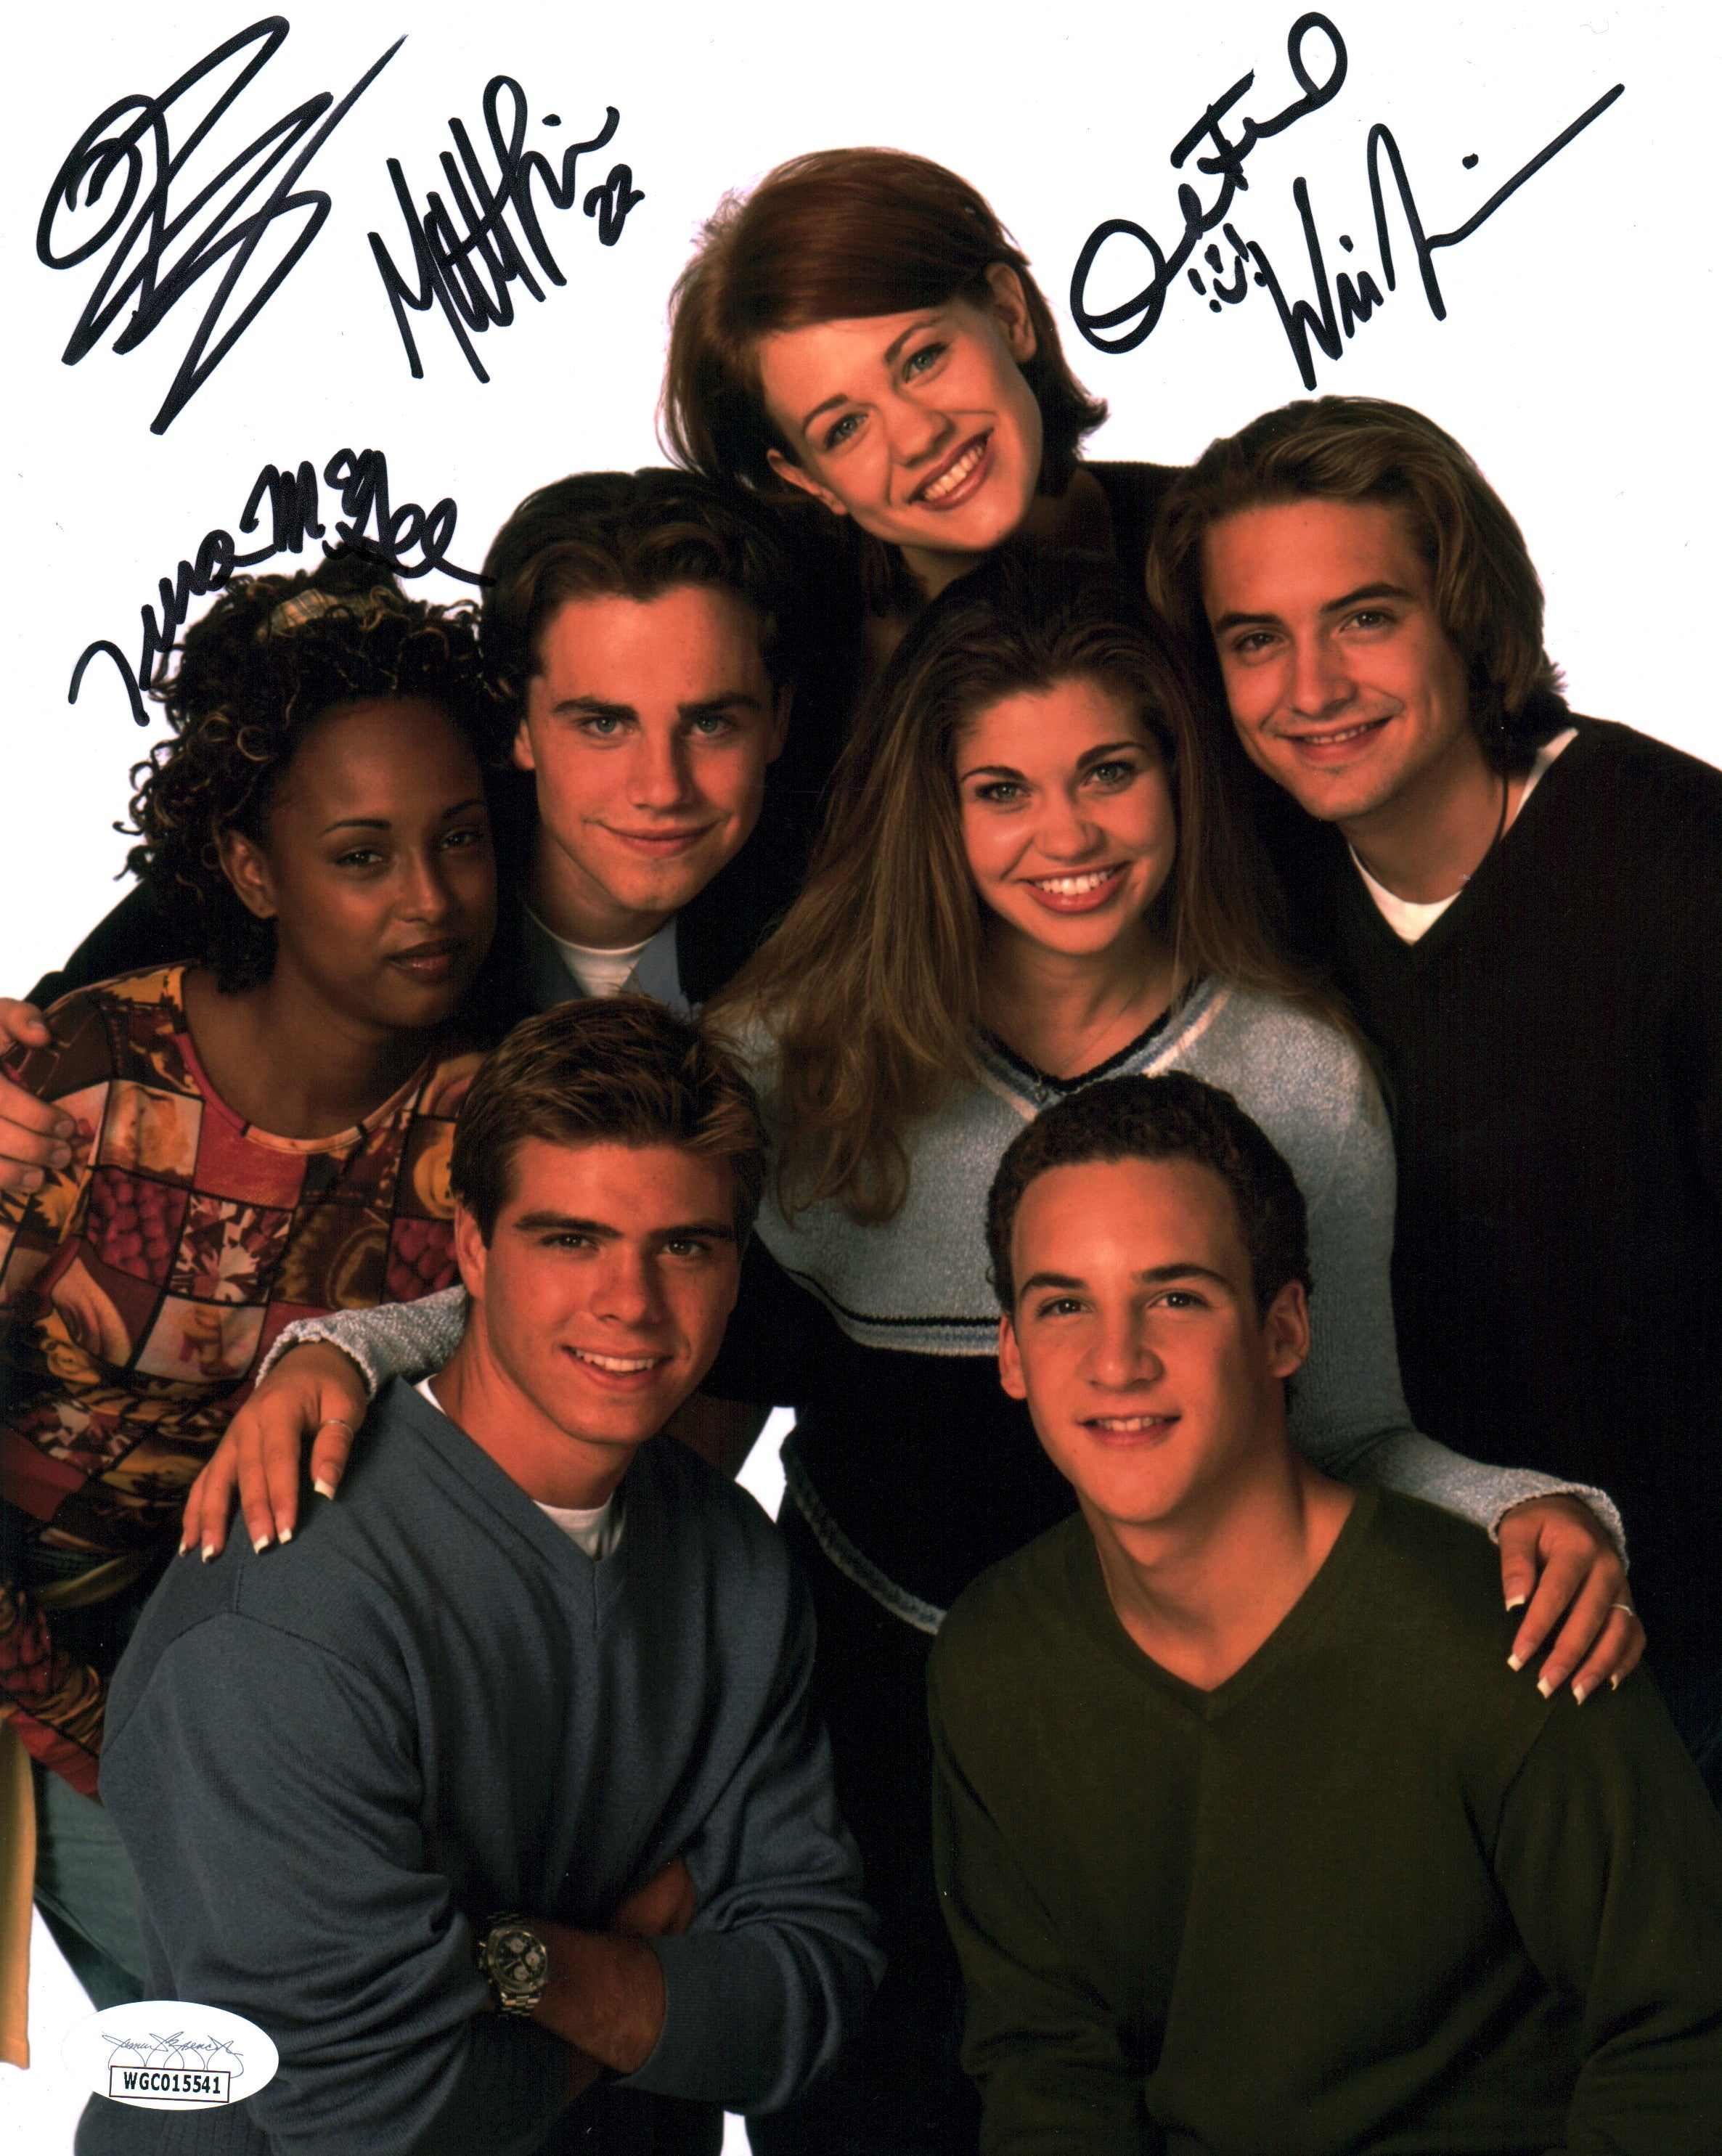 Boy Meets World 8x10 Signed Photo Cast x5 Fishel, Friedle, Lawrence, McGee, Strong JSA Certified Autograph